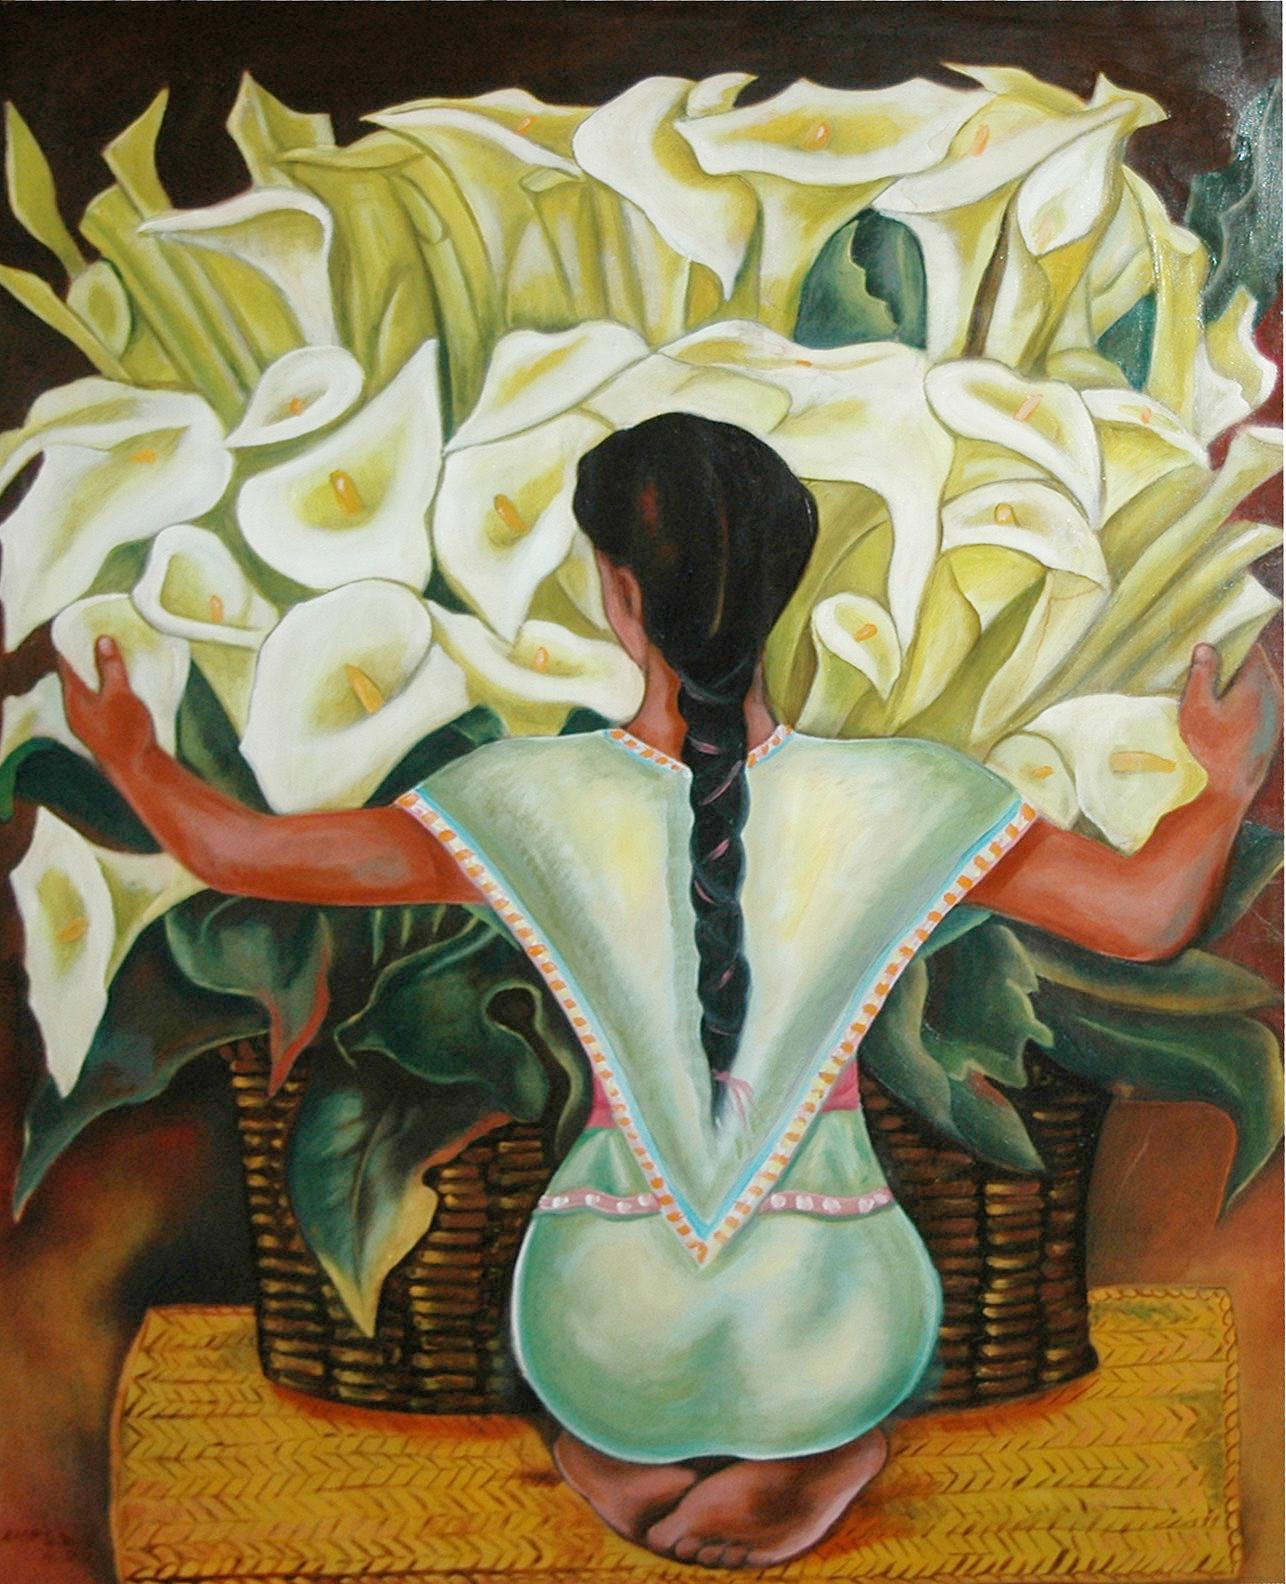 Armando Campero Figurative Painting - After Diego Rivera